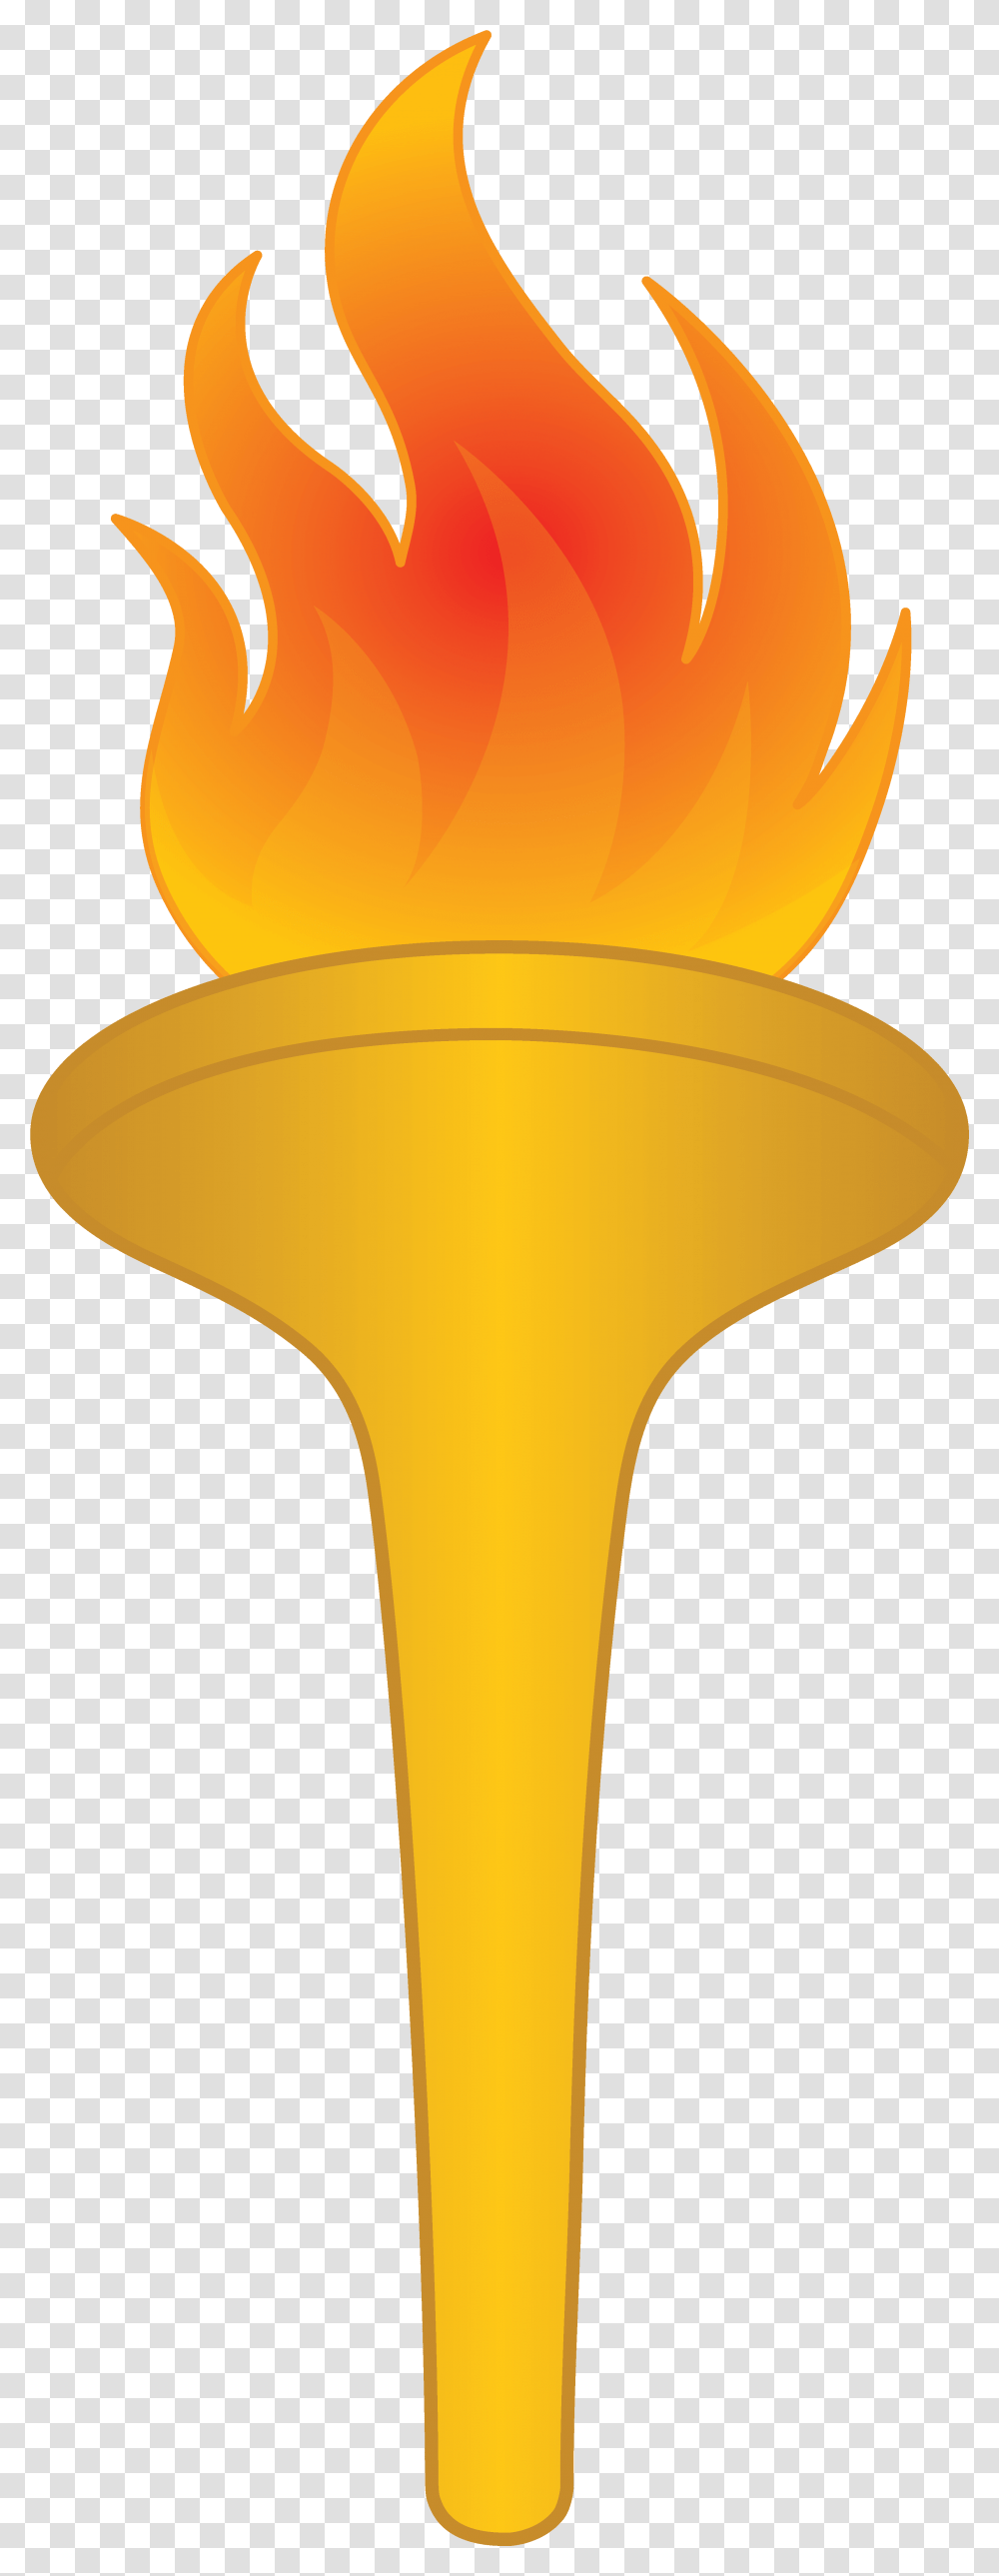 Fire Torch Banner Royalty Free Download Torch Clip Art, Hammer, Tool, Light, Goblet Transparent Png